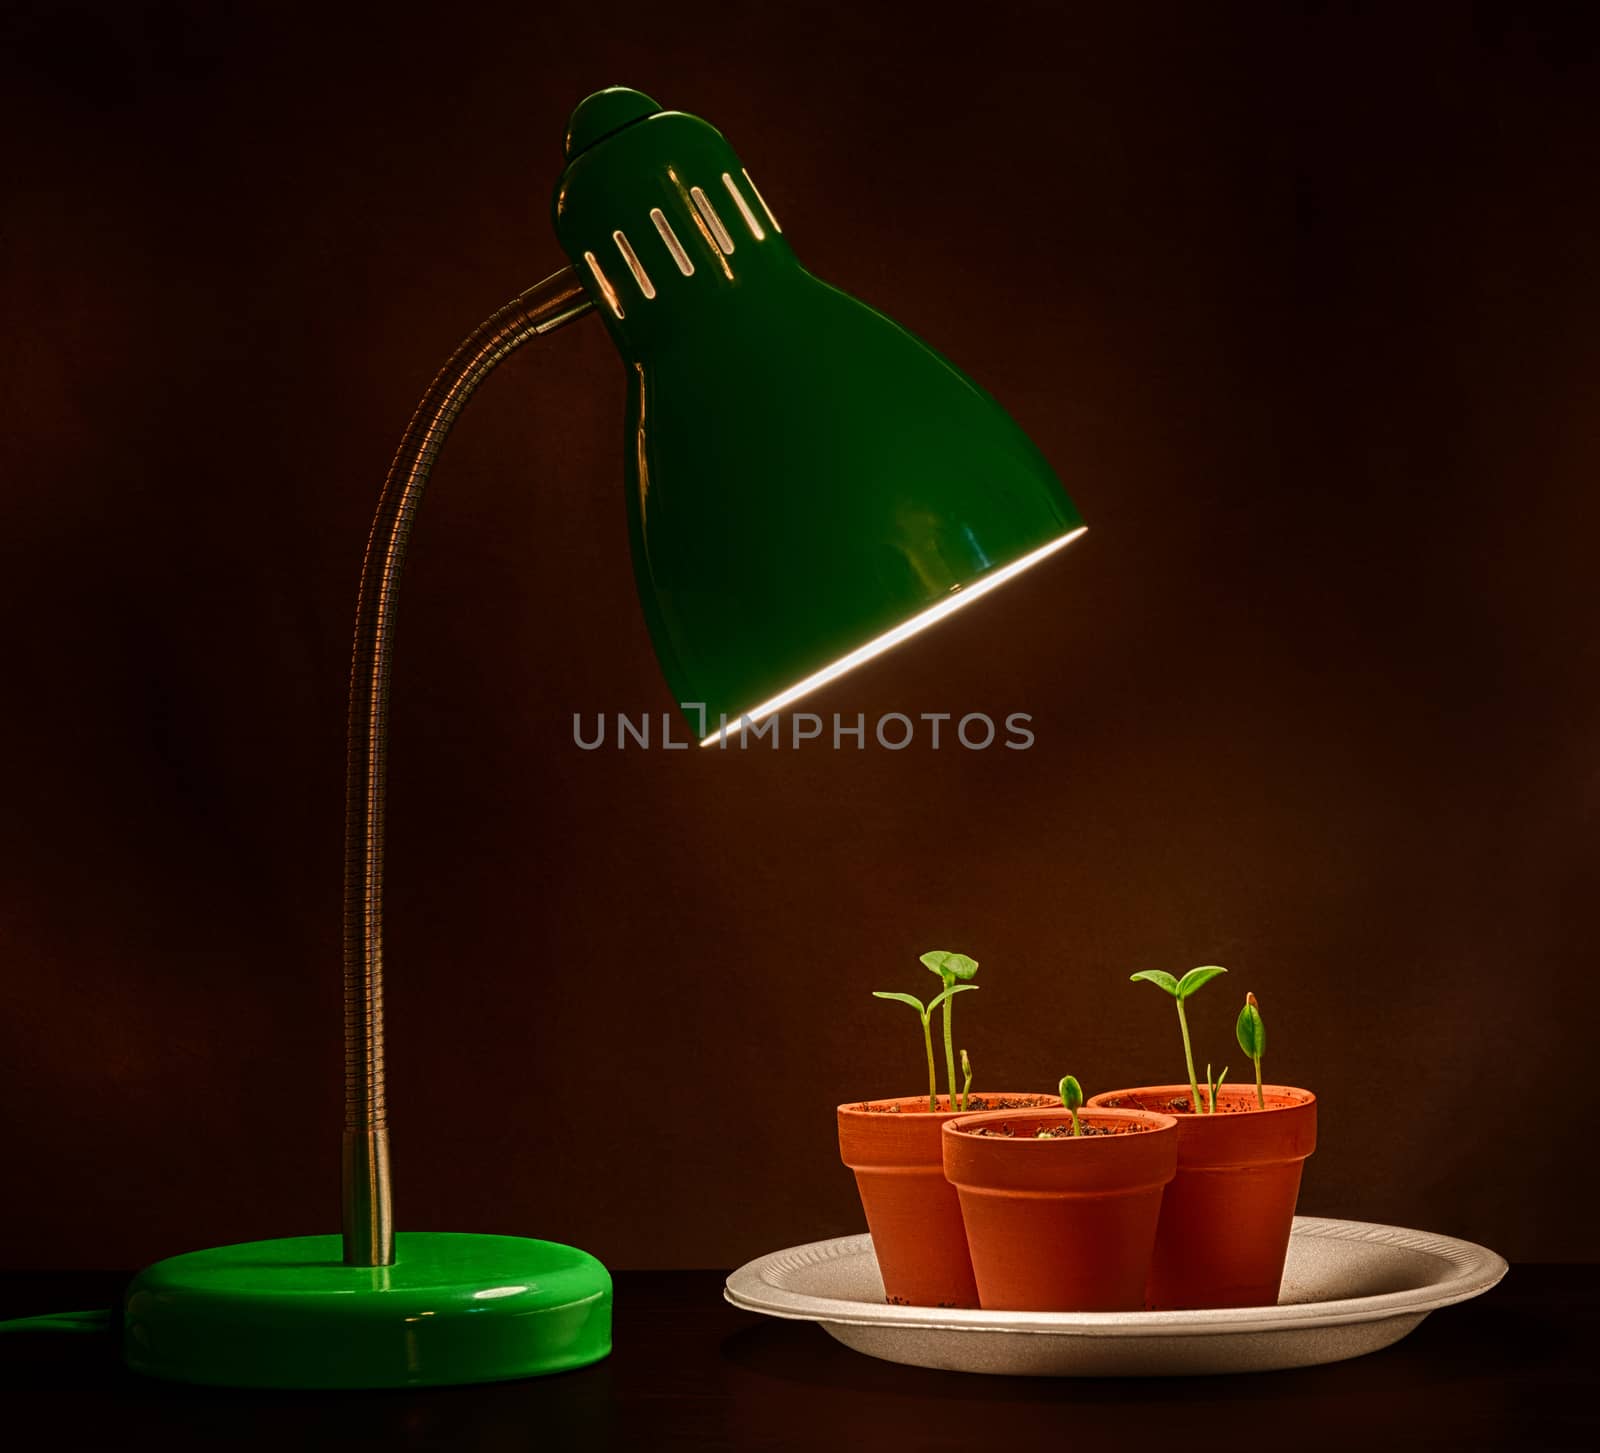 Three seedlings grow under the influence of a plant growth light.  Great metaphorical image to symbolize business mentoring, training, support